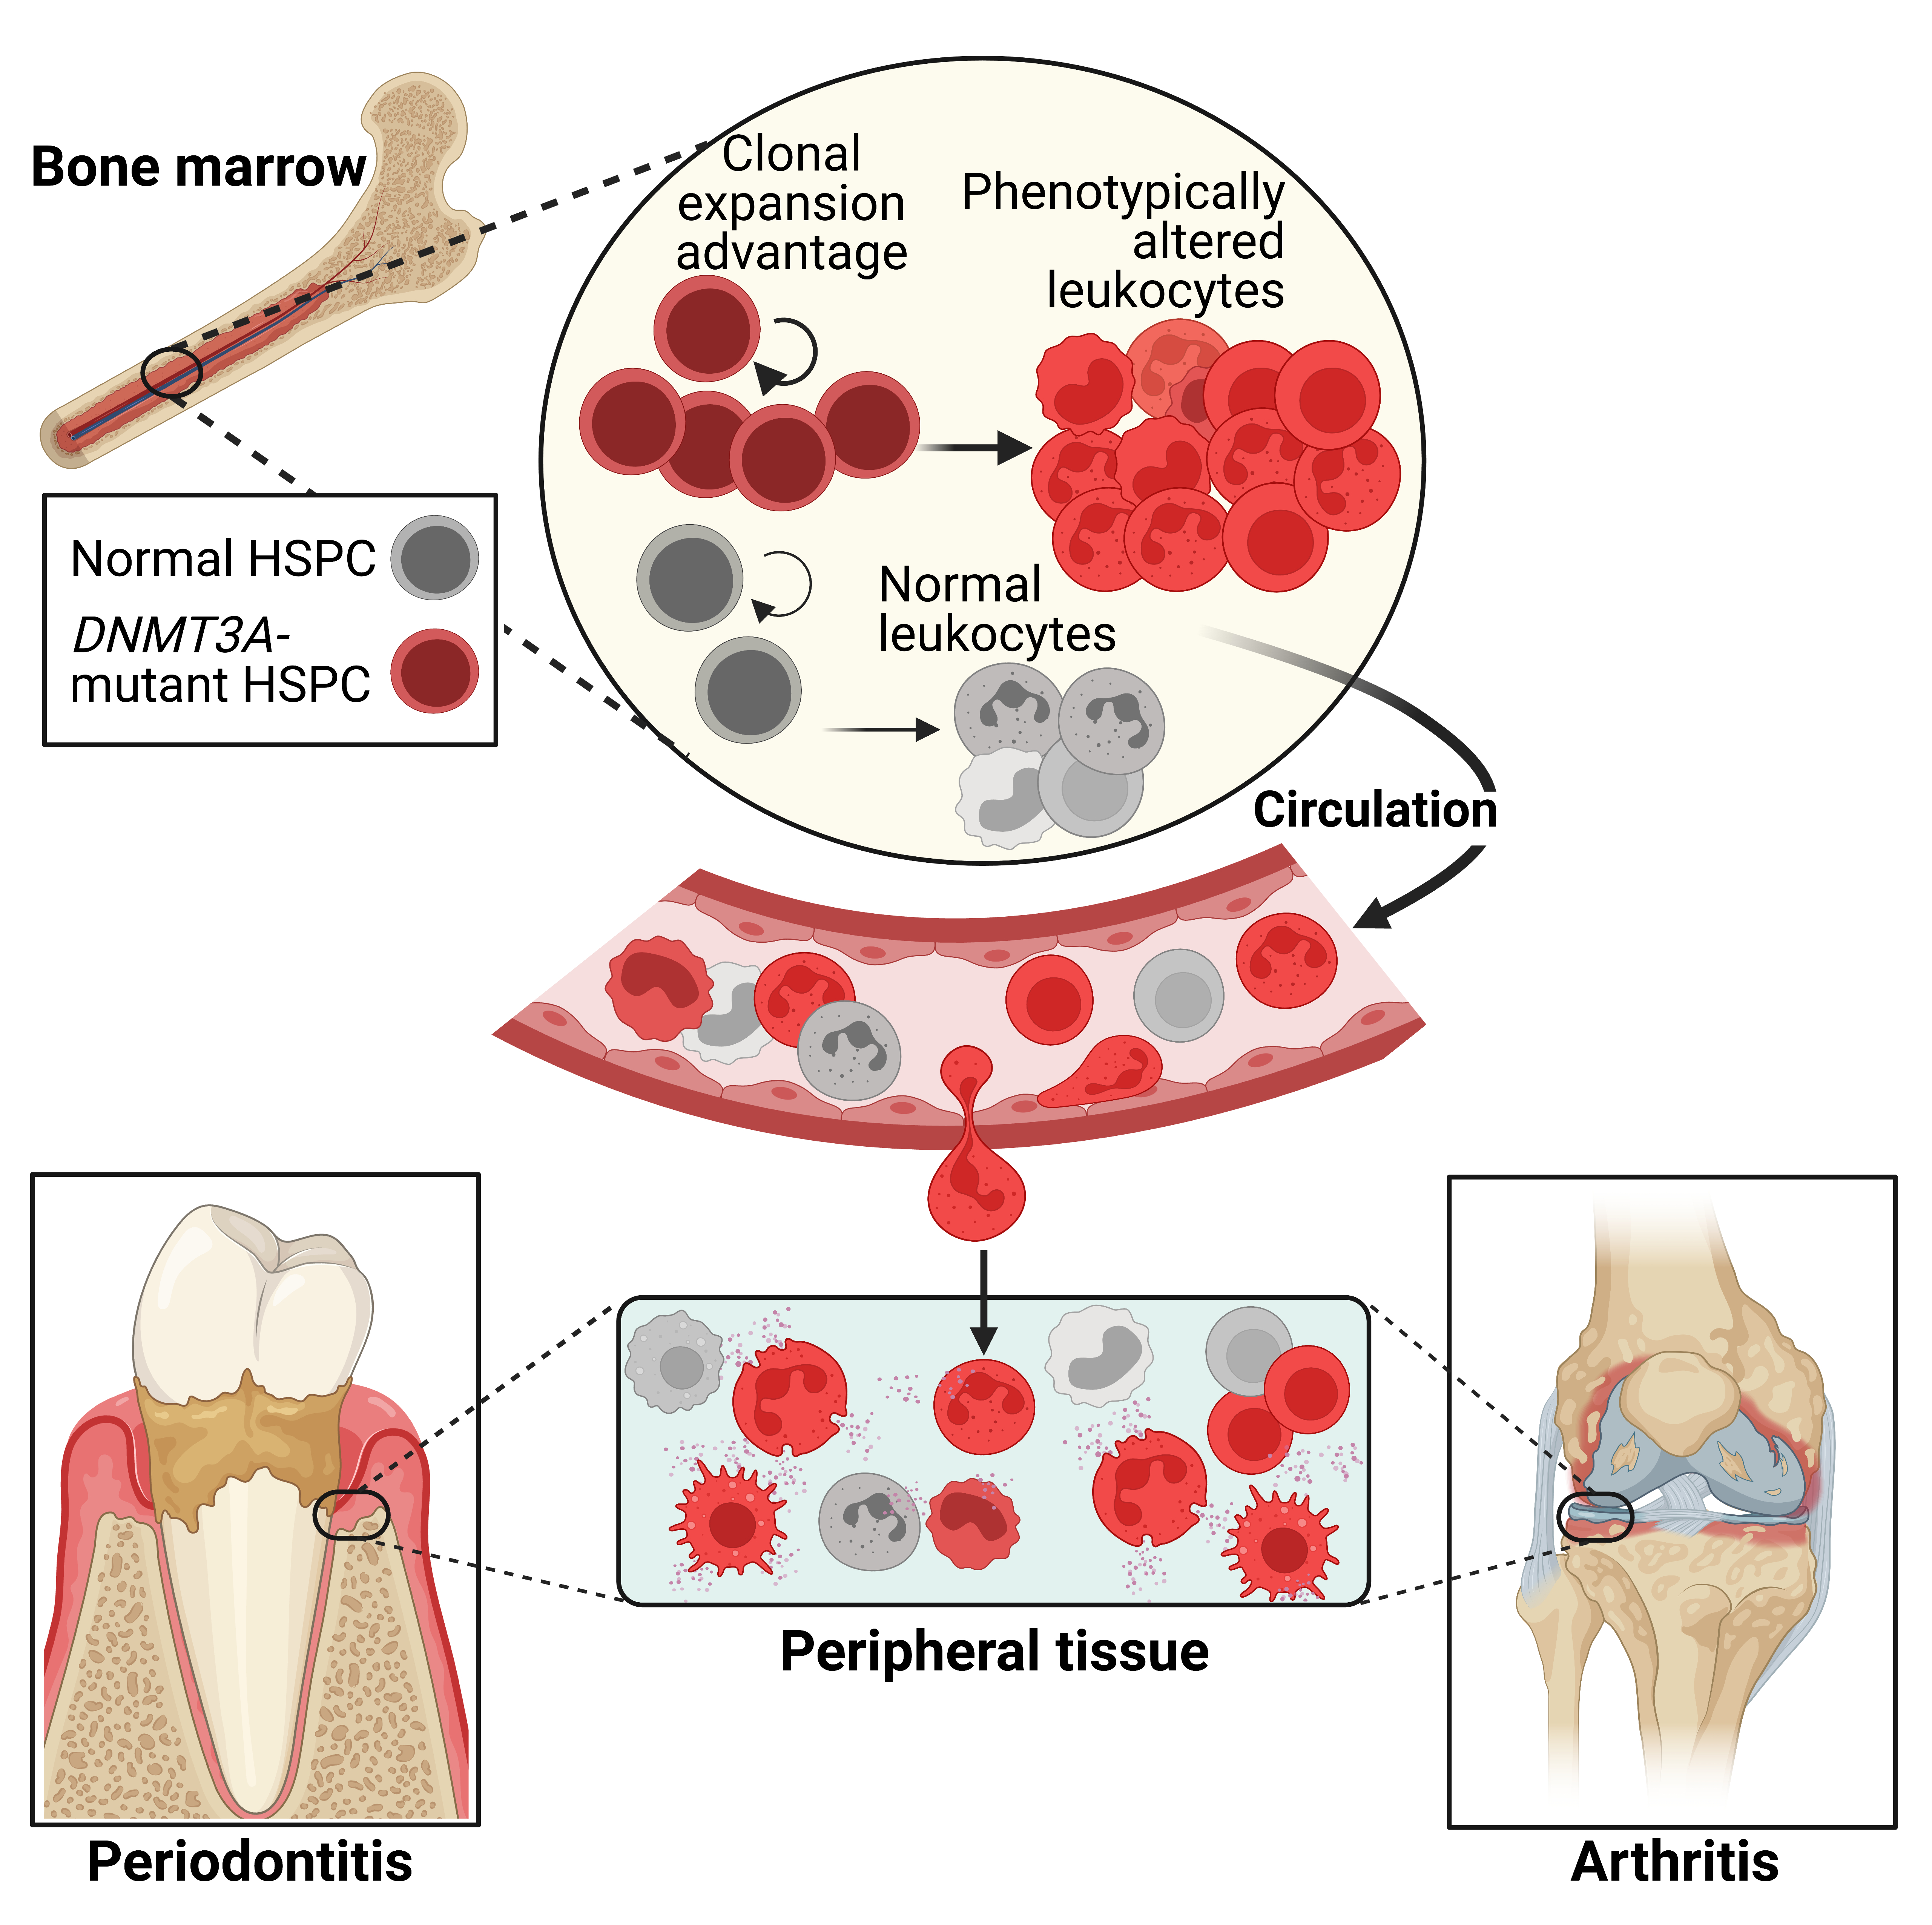 Illustration demonstrating clonal expansion of hematopoietic stem cells driving inflammatroy bone loss